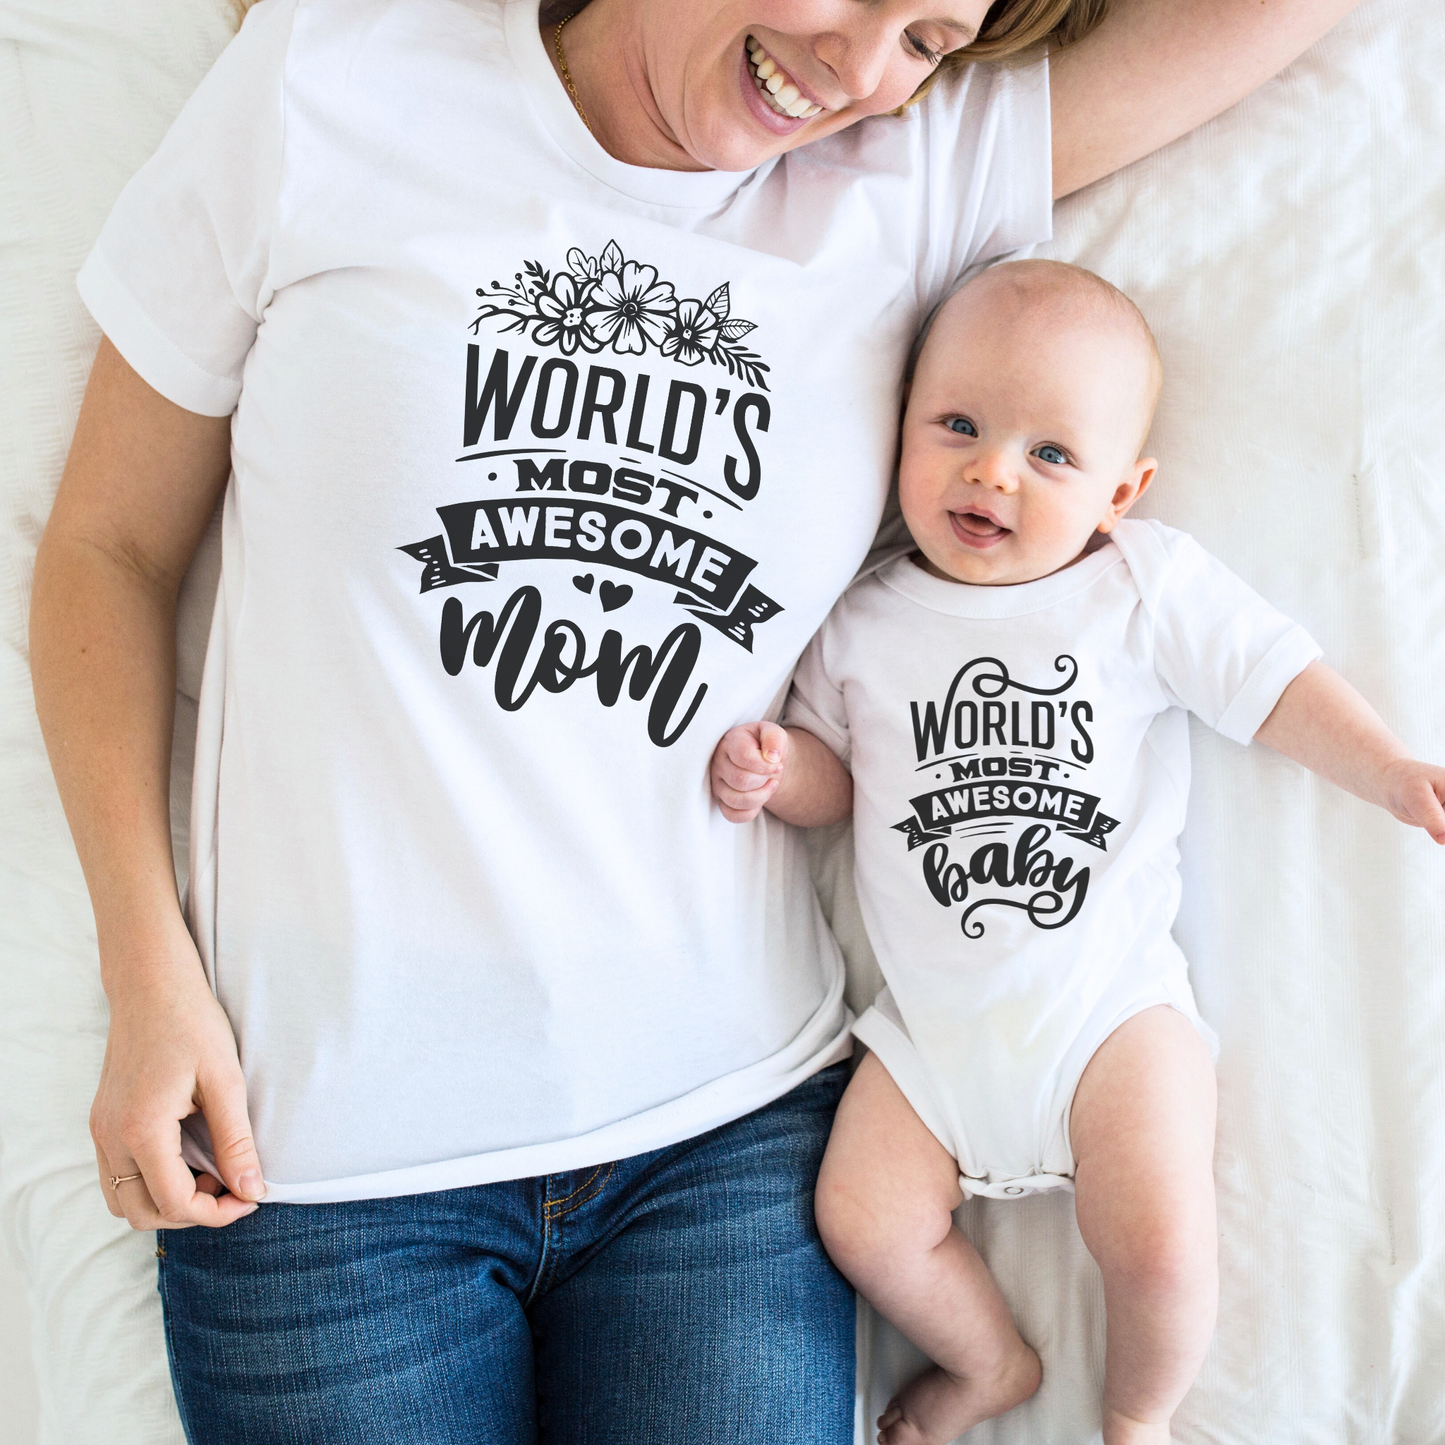 World's Most Awesome Mom & Baby Matching Sets